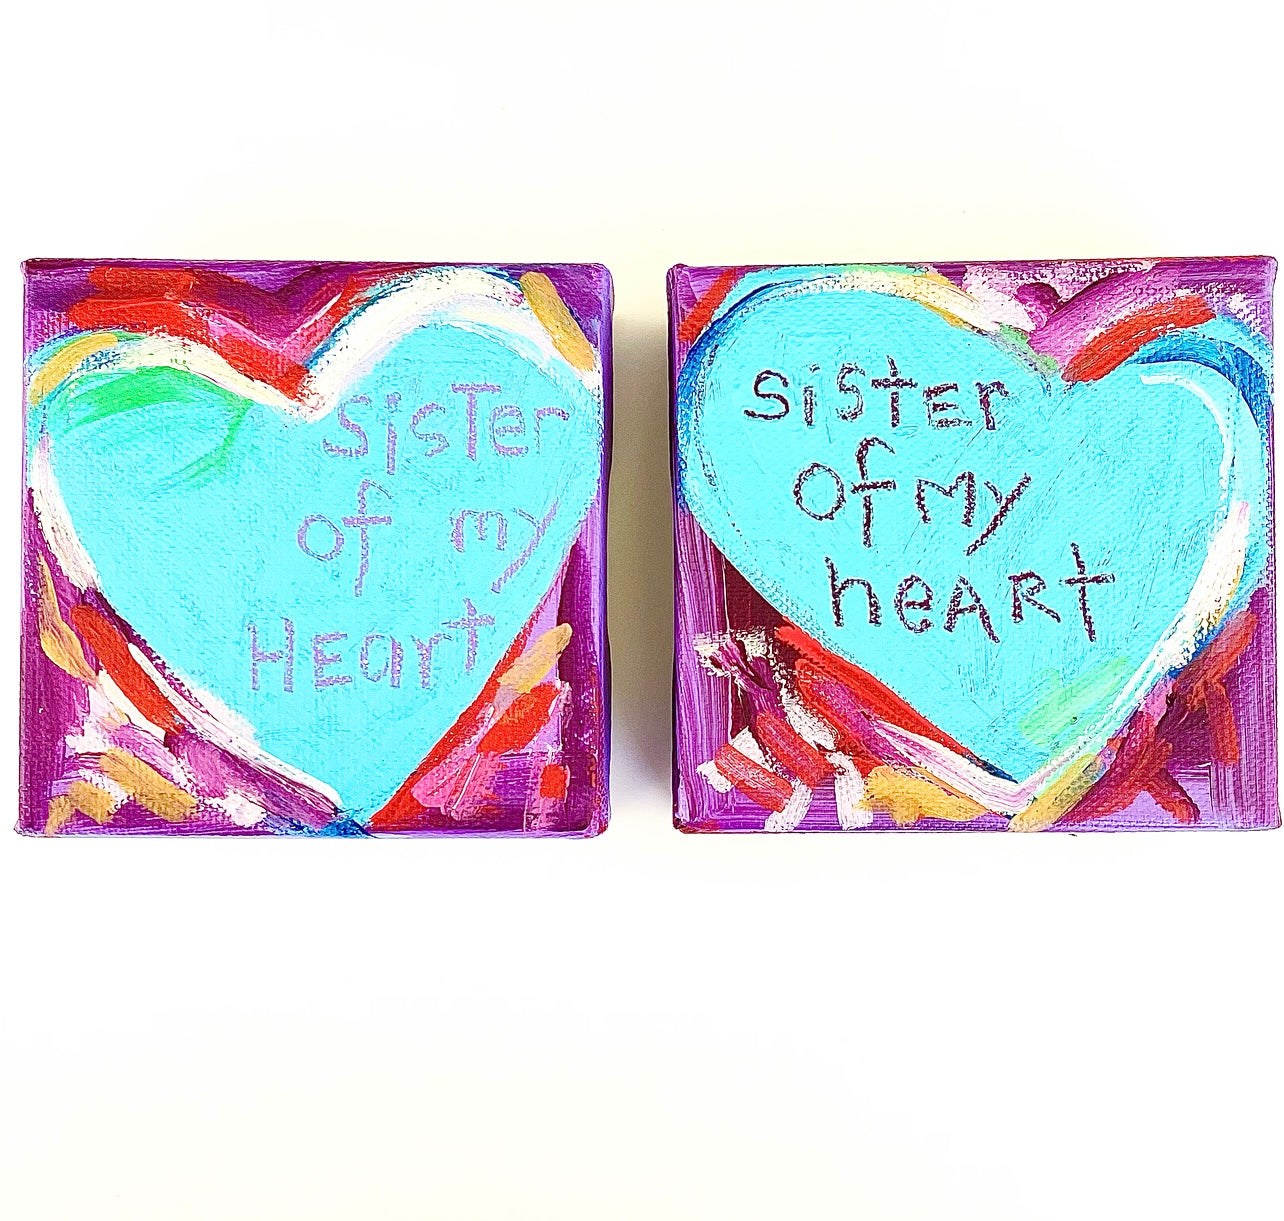 3rd Day of Christmas SISTERHOOD / FRIENDSHIP SET C - 4” x 4” One for You & One for Her